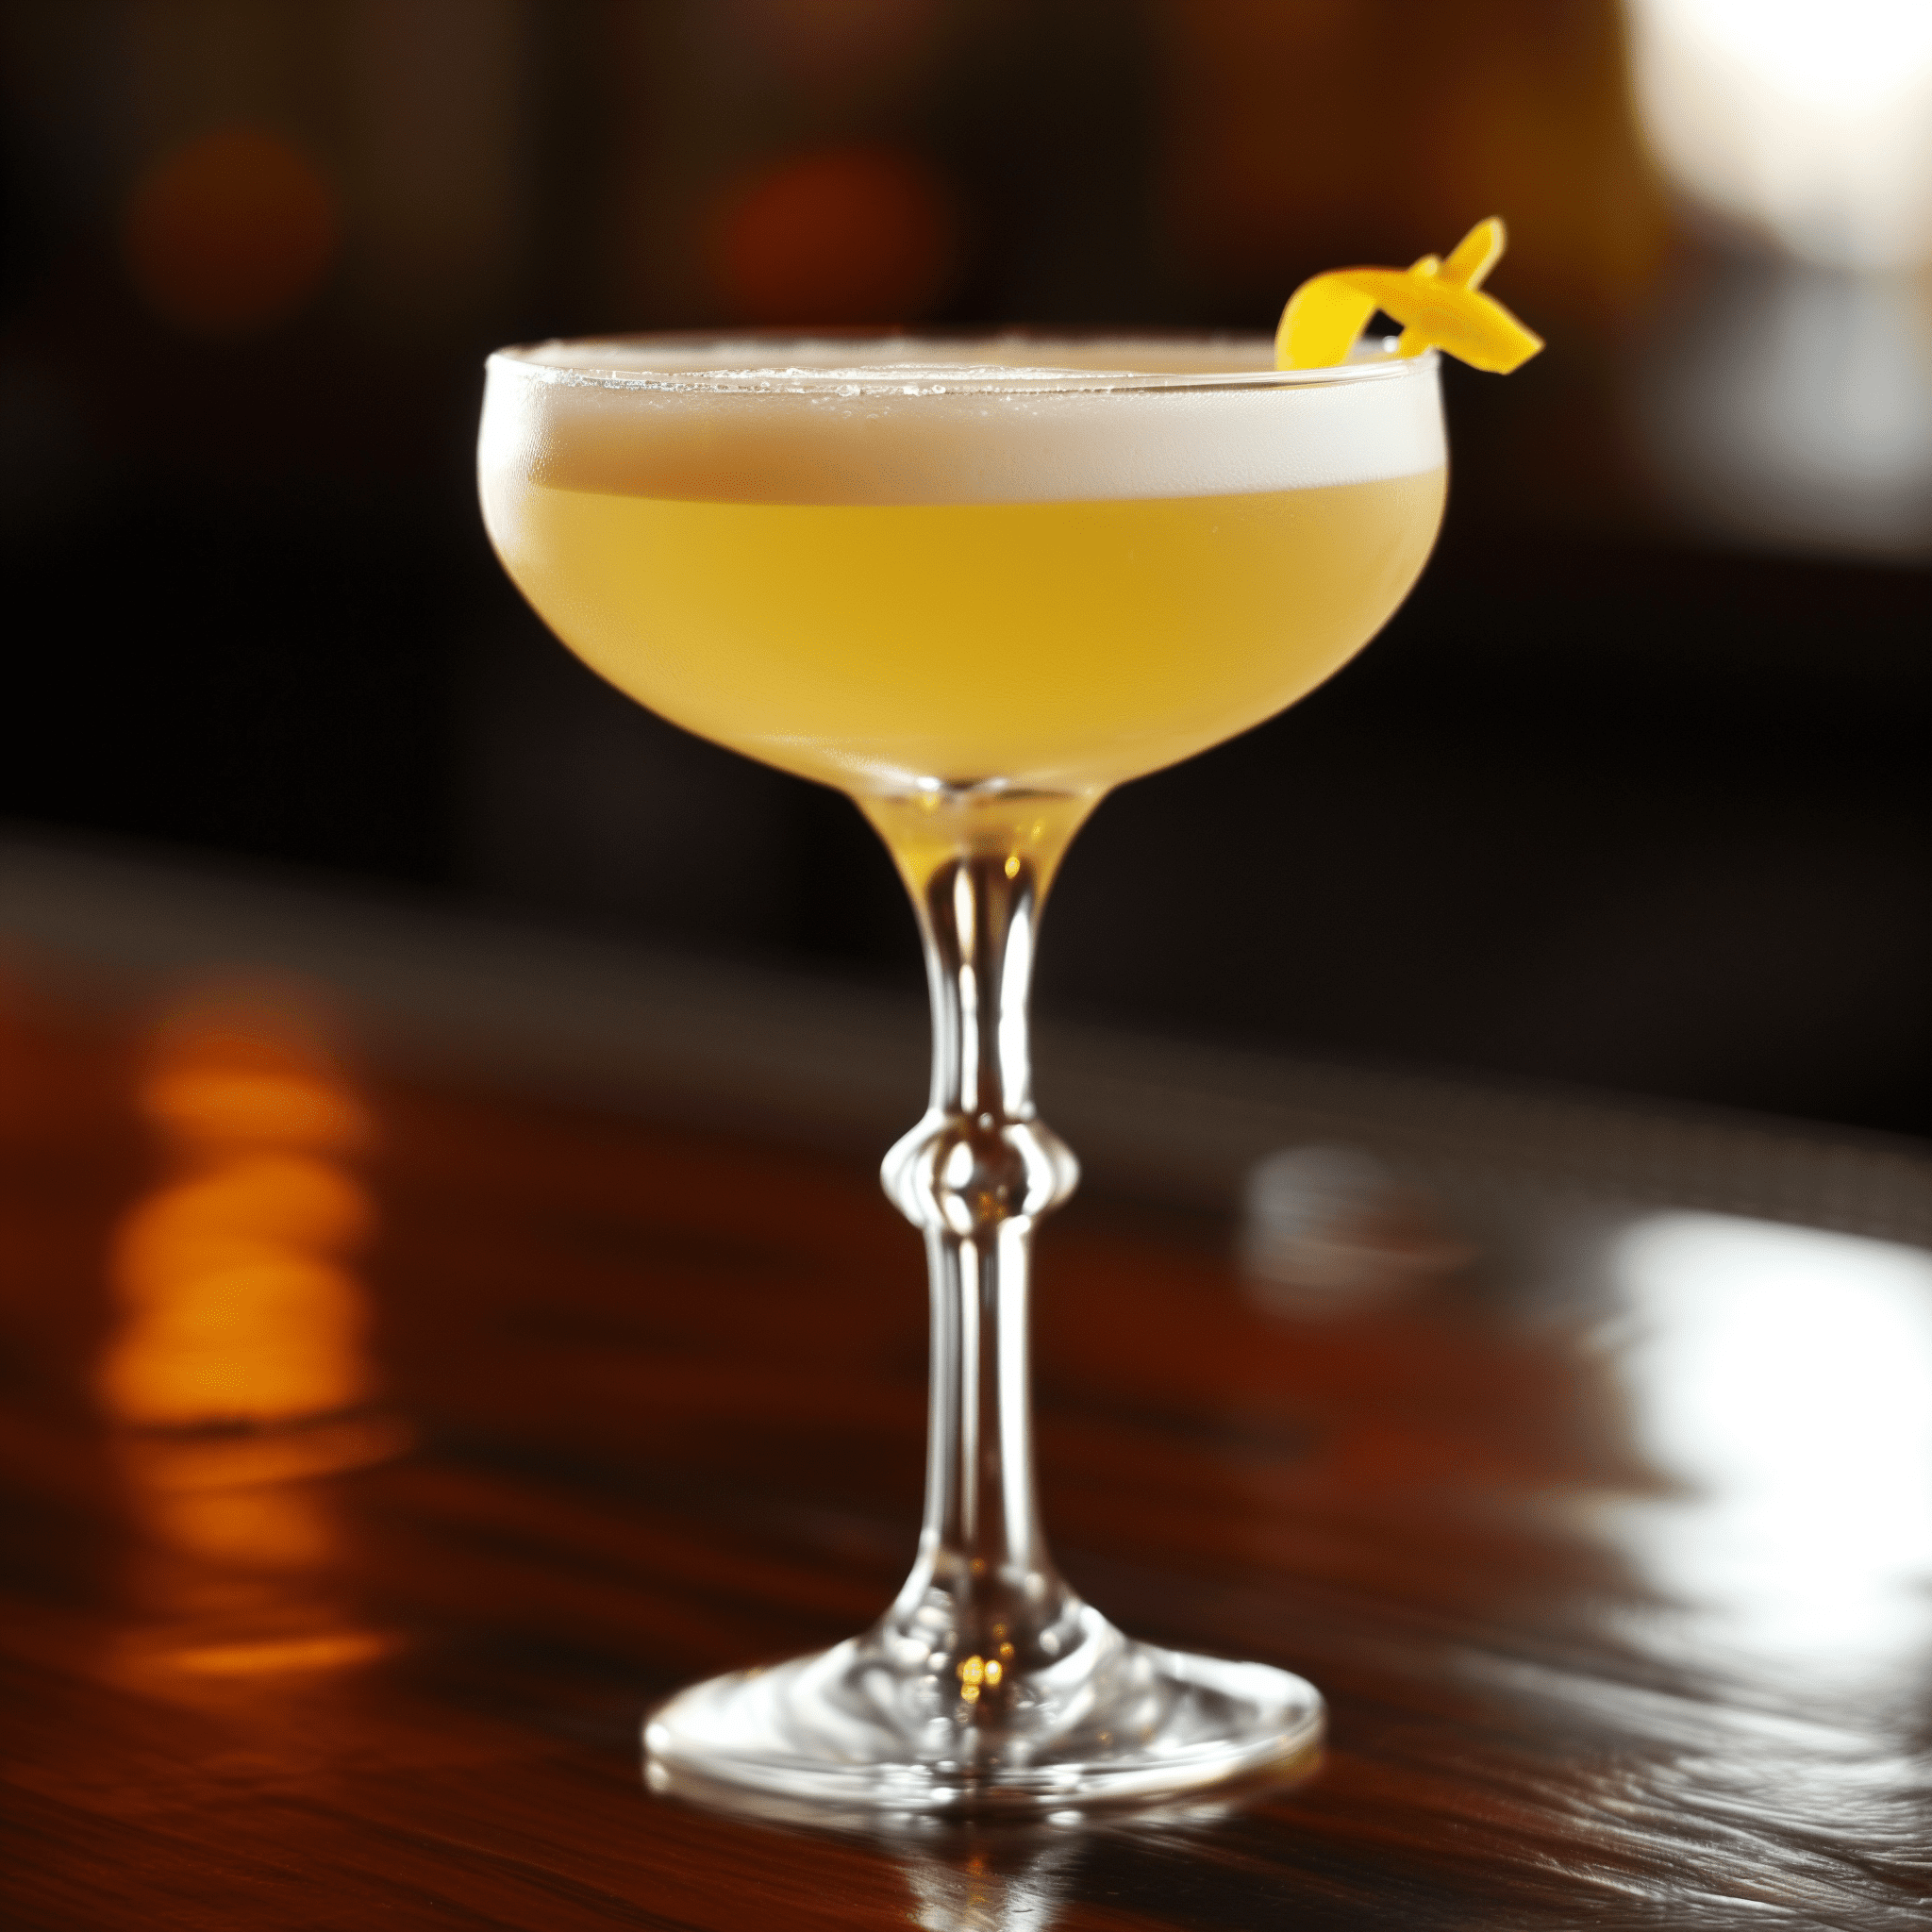 Silver Fox Cocktail Recipe - The Silver Fox is a symphony of flavors with a creamy, velvety texture. The botanicals of the gin shine through, complemented by the sweet, nutty notes of orgeat and amaretto. The lemon juice adds a refreshing tartness, while the egg white provides a luxurious frothiness.